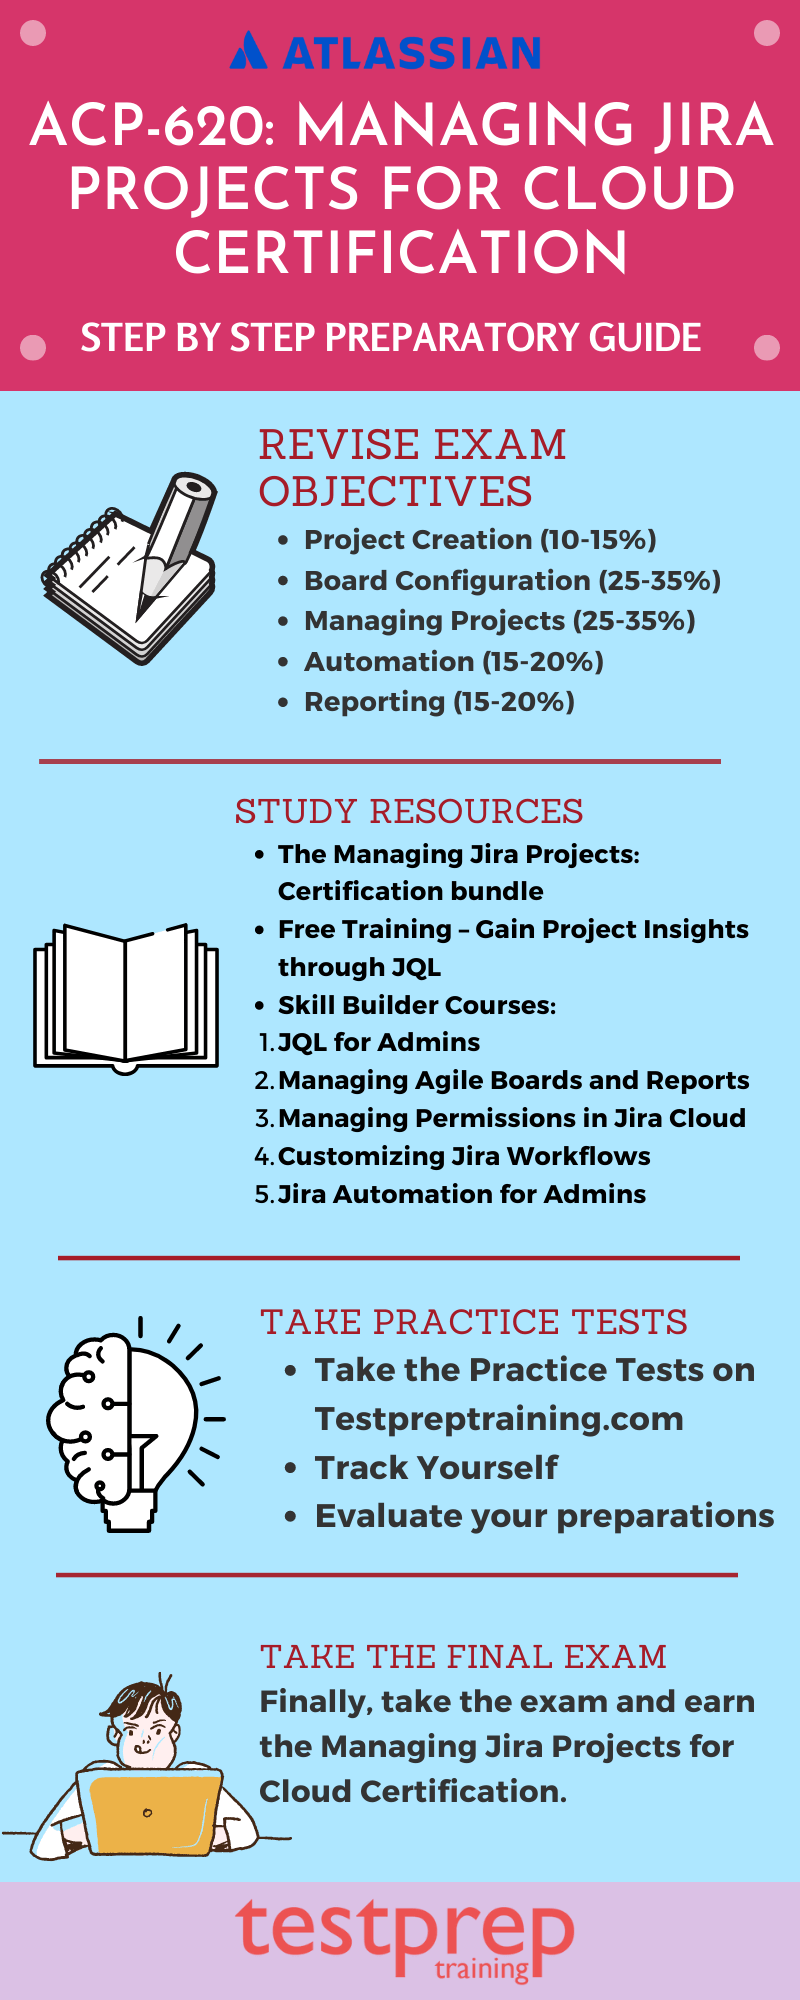 ACP-620 Managing Jira Projects for Cloud Certification Study guide